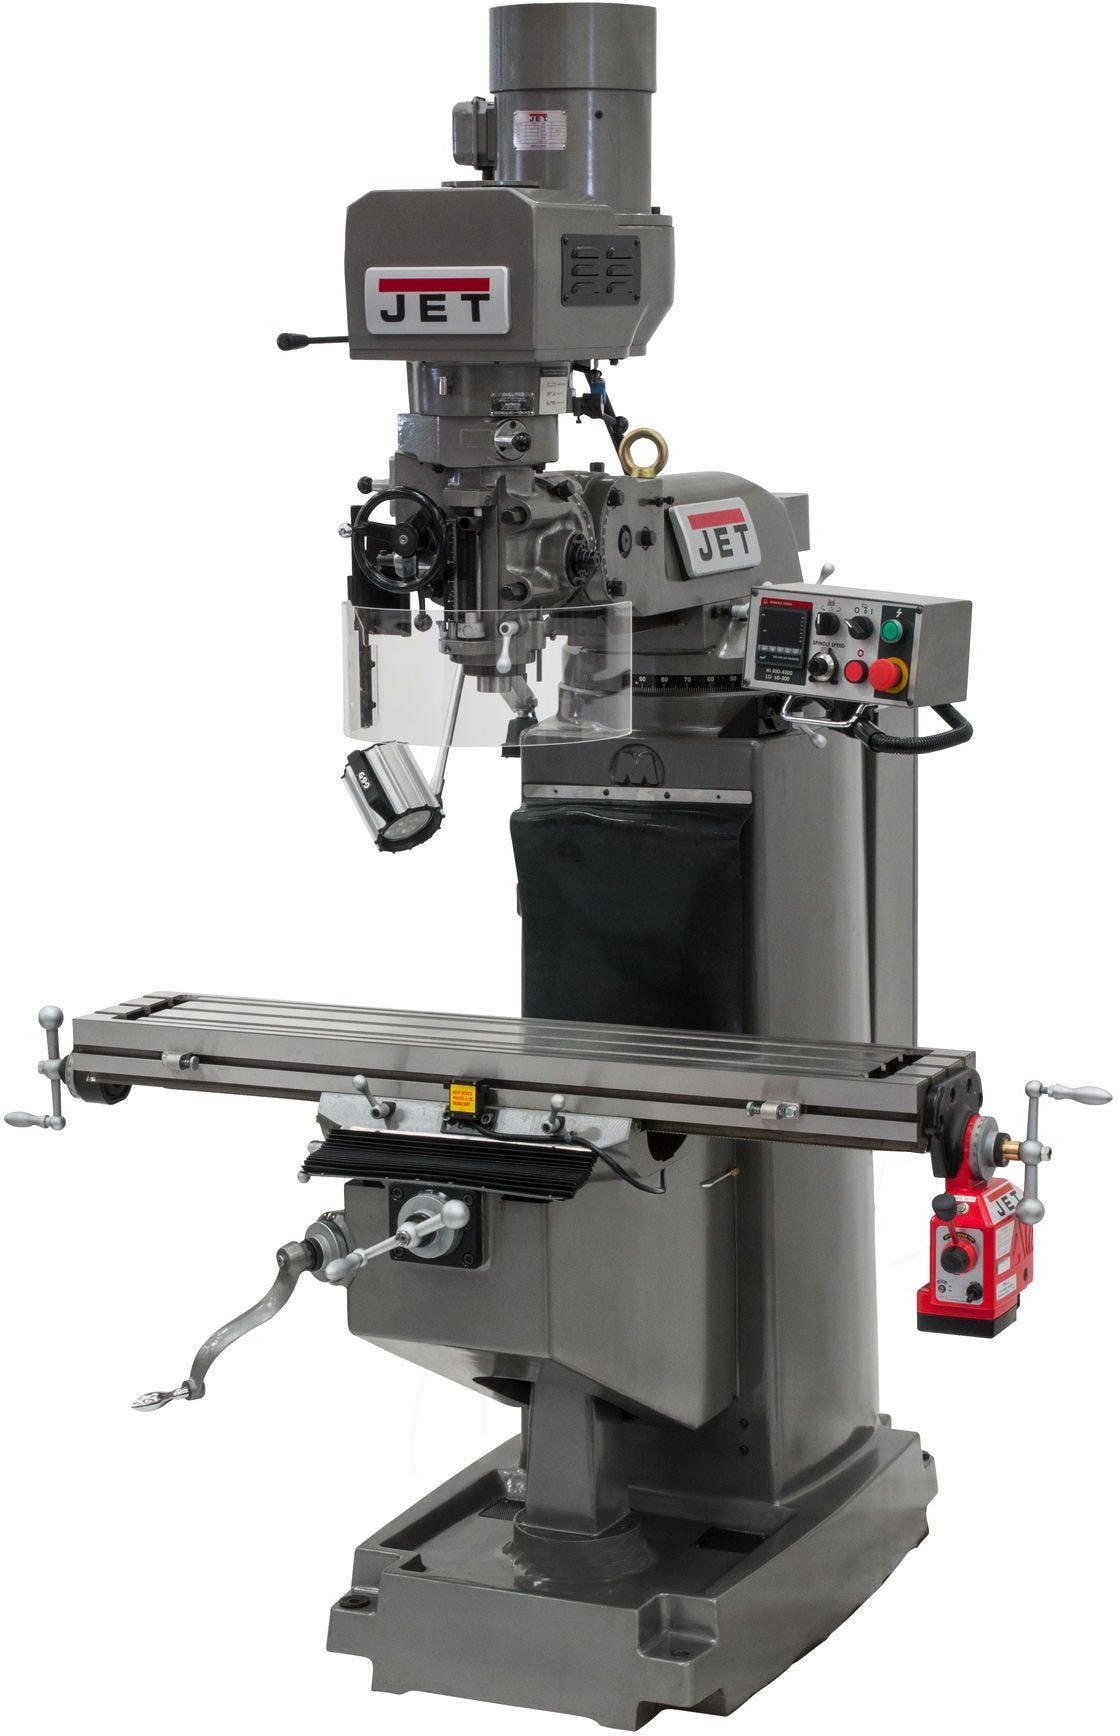 Jet Tools 690685 JTM 1050EVS2230 Mill With 2 Axis Acu Rite MilPwr G2 CNC Controller and Air Powered Draw Bar